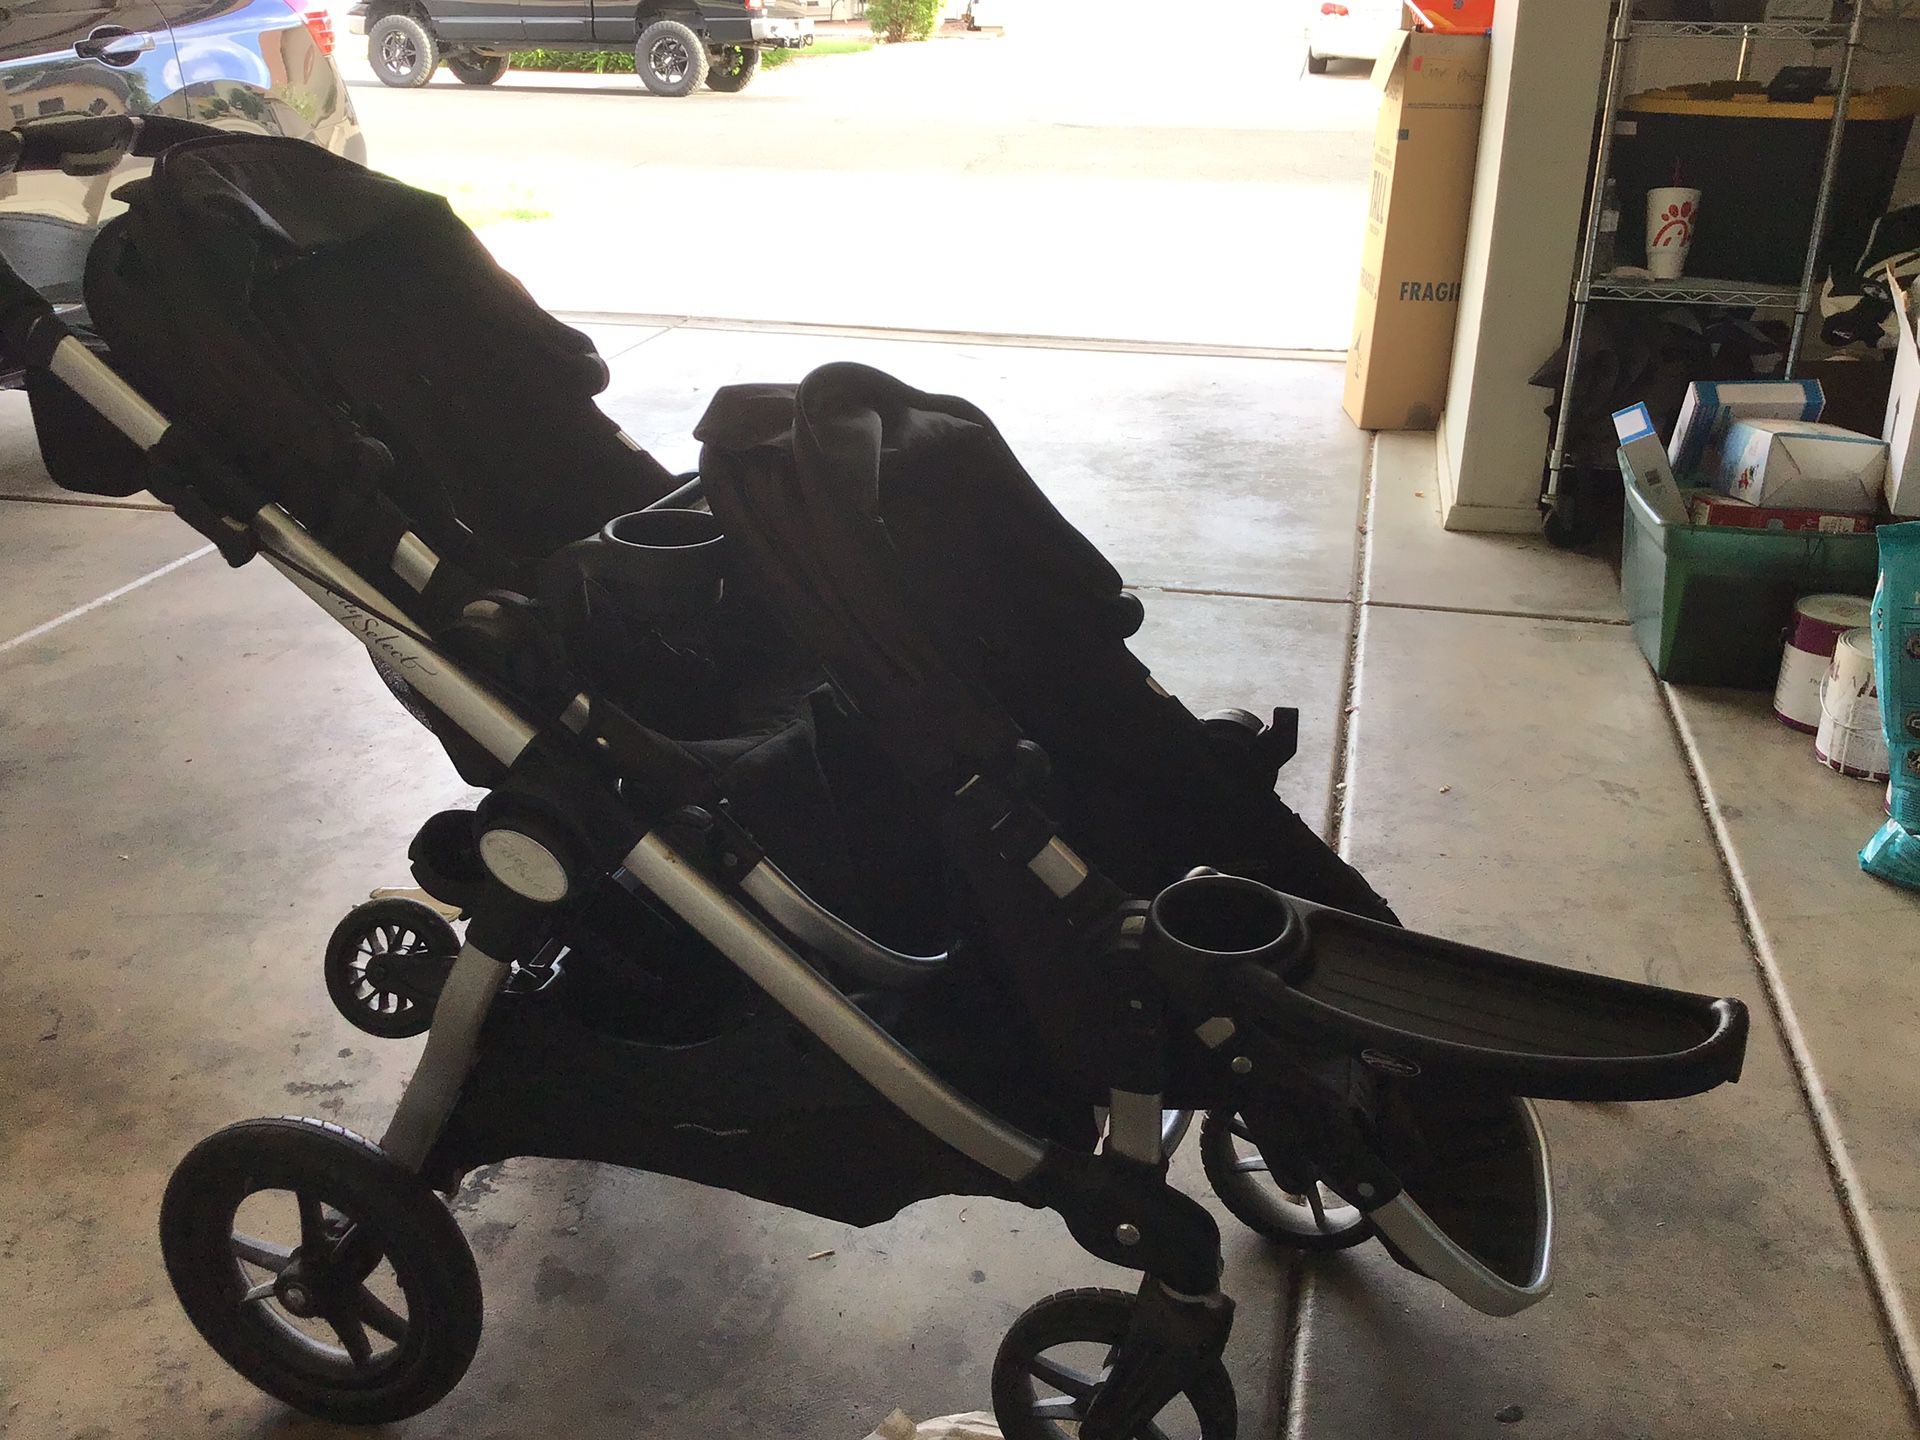 Baby jogger city select double stroller